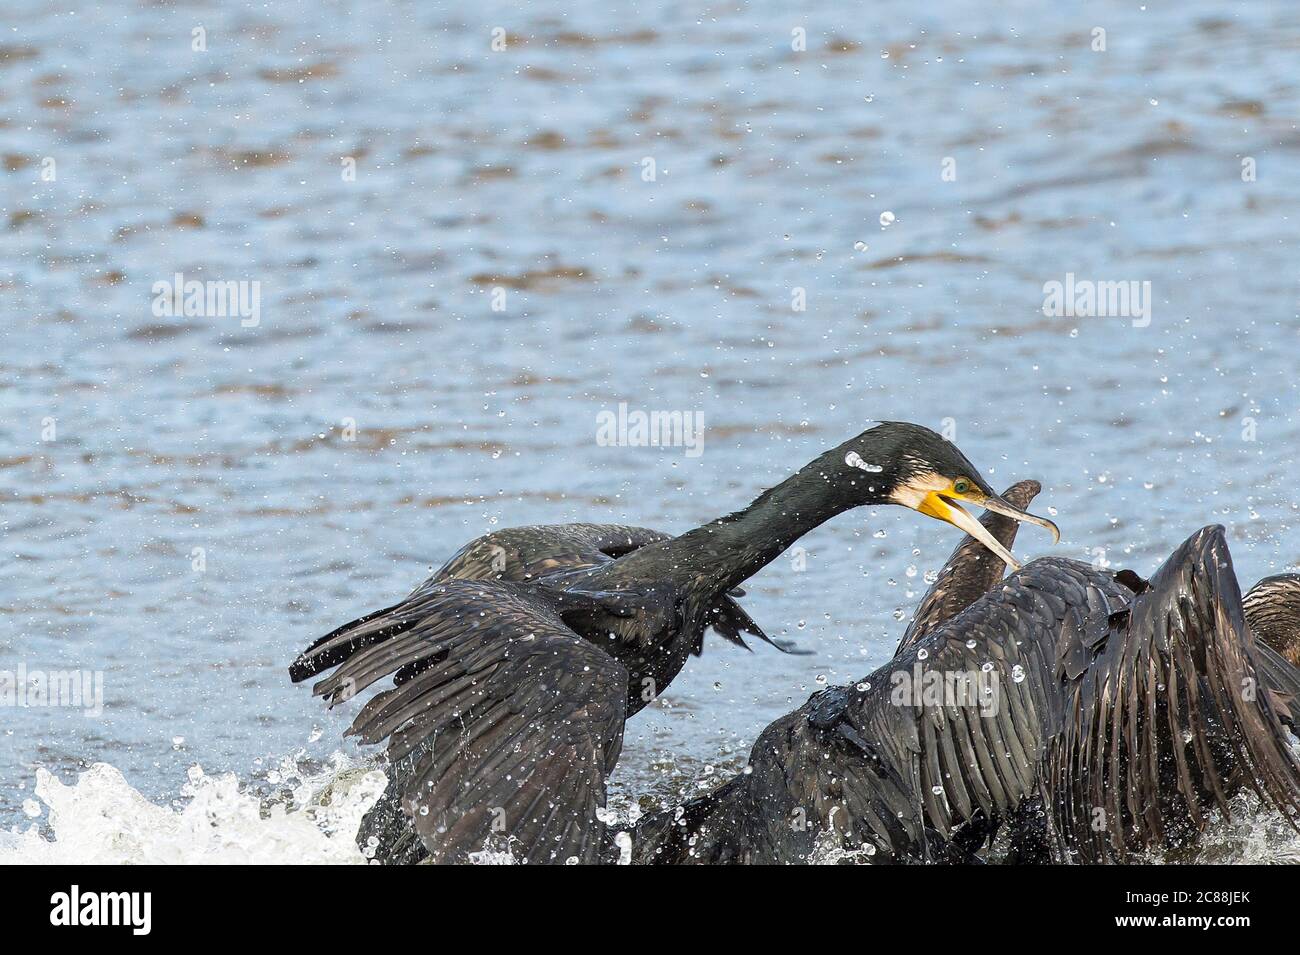 Phalacrocorax carbo. Nests in trees. Reproduces on ledges and cliffs along the seafront. Paul da Tornada village. Stock Photo